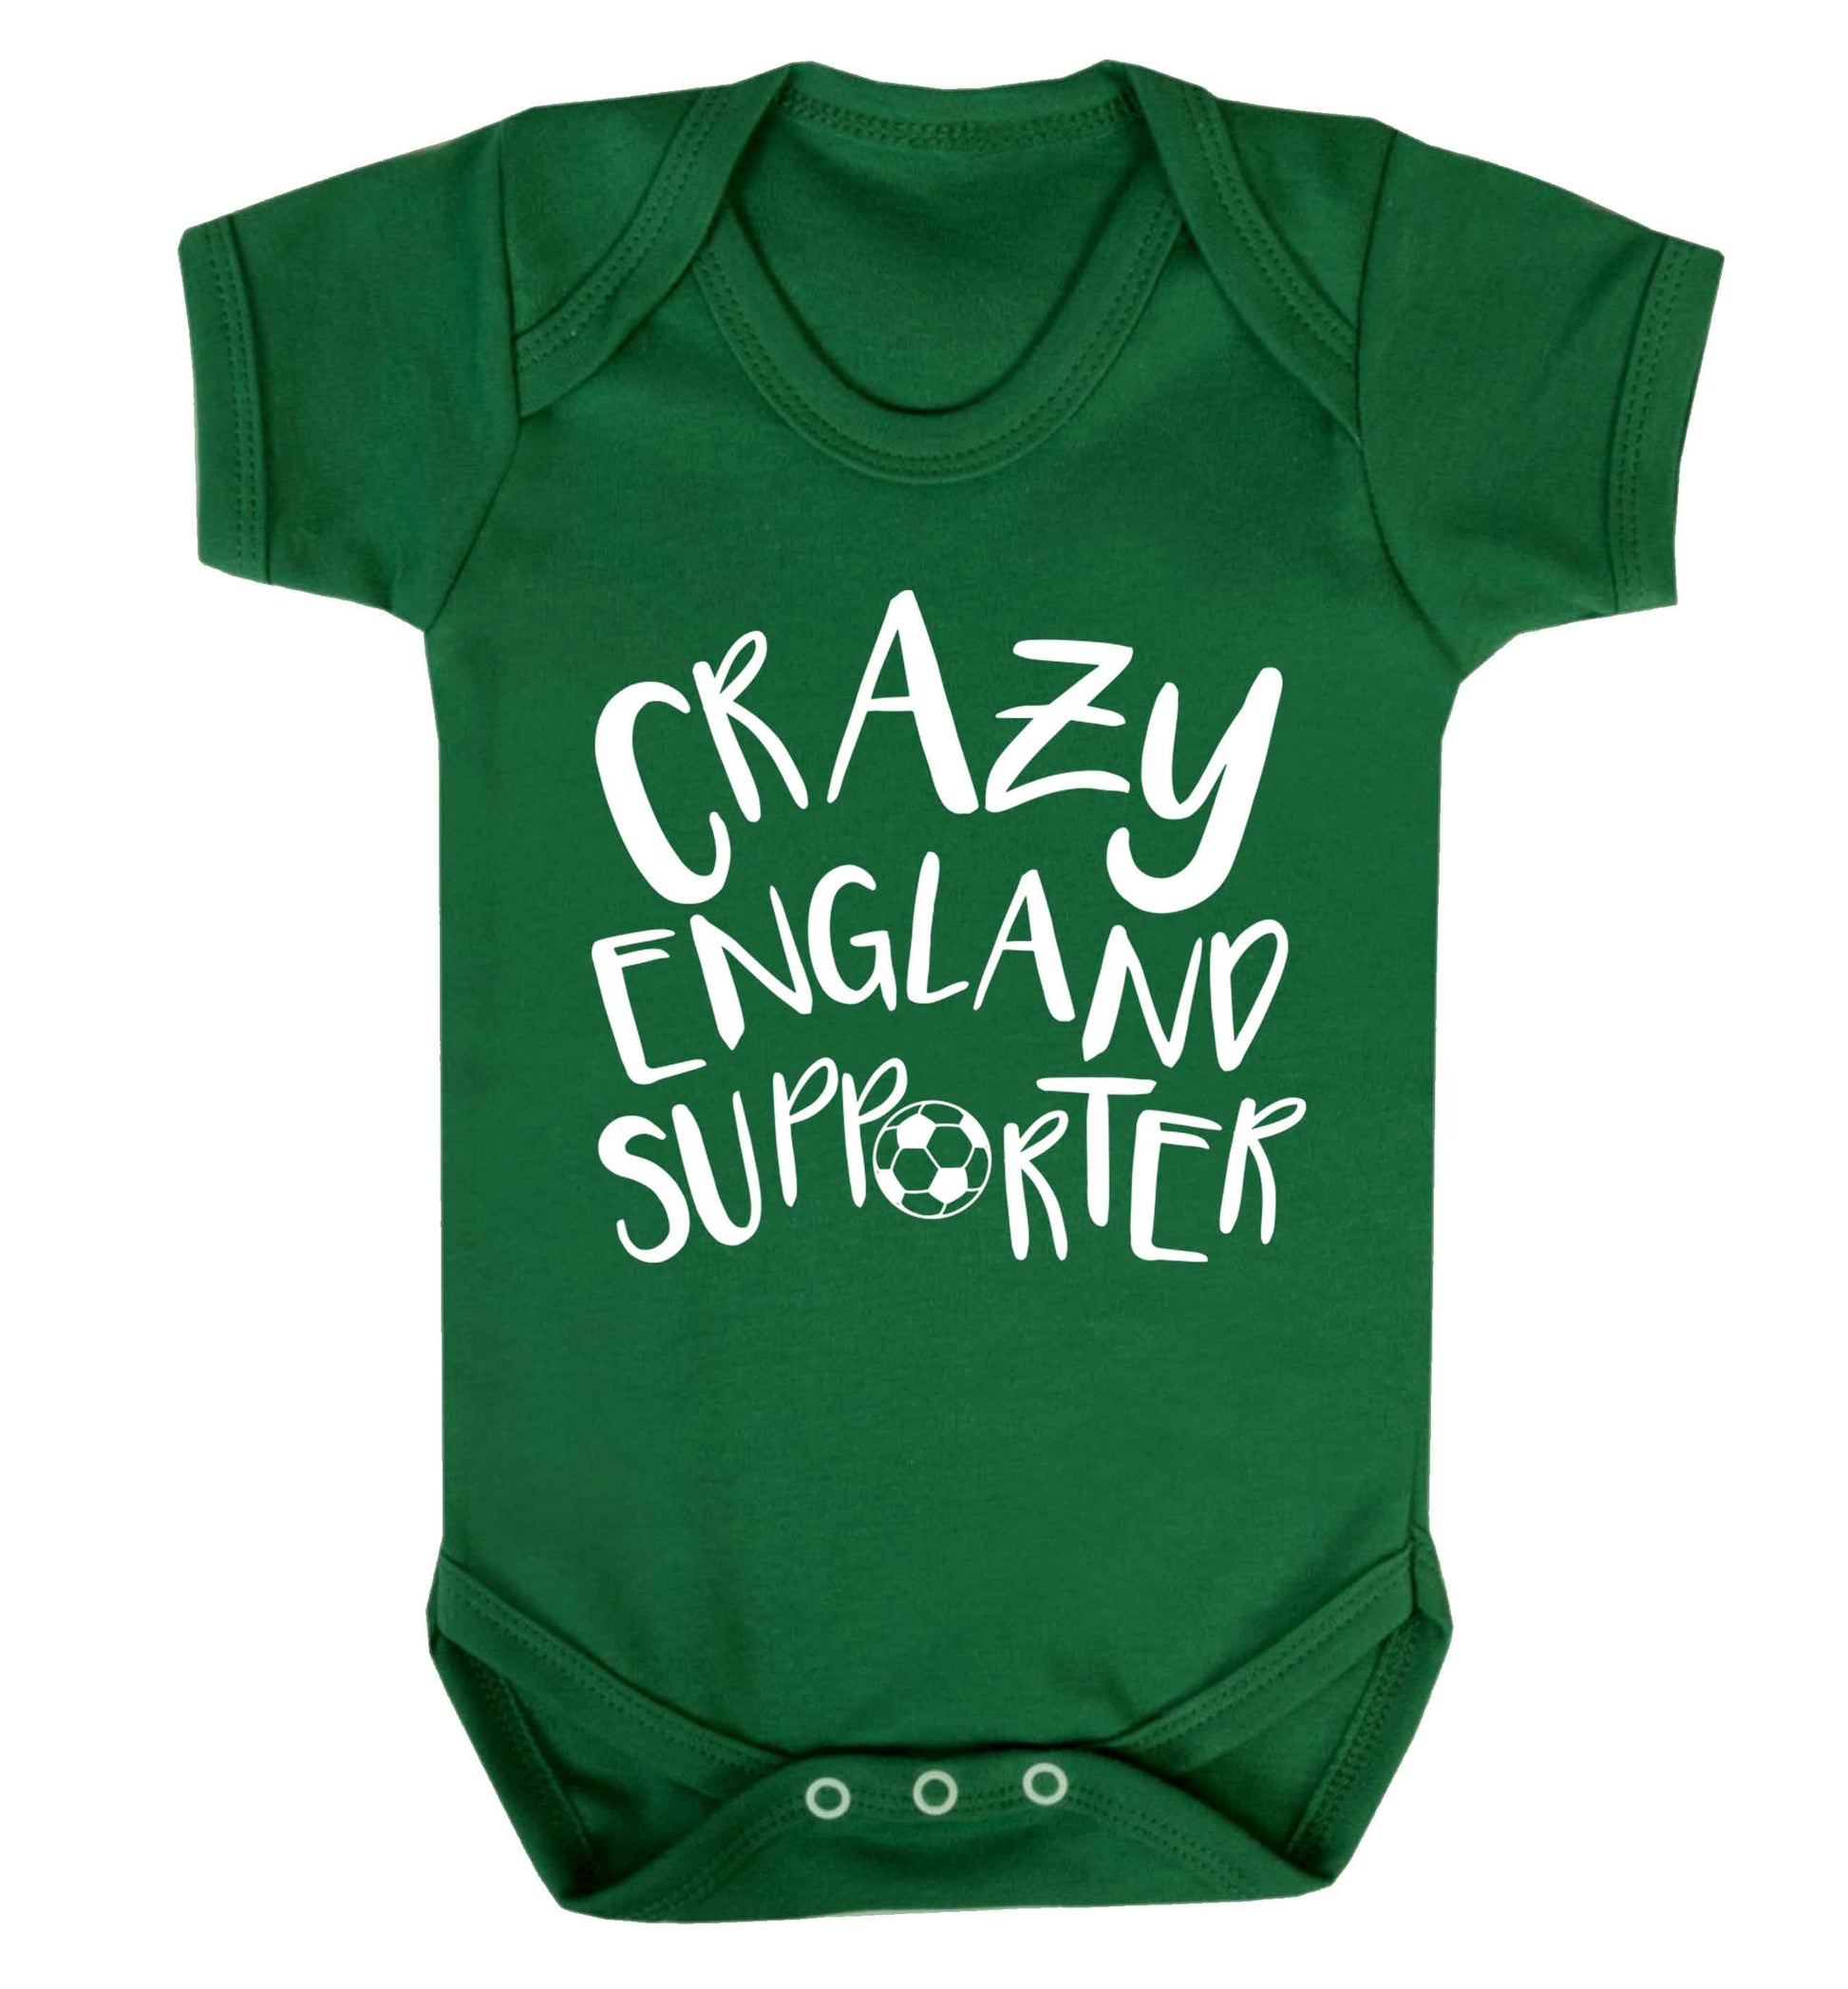 Crazy England supporter Baby Vest green 18-24 months